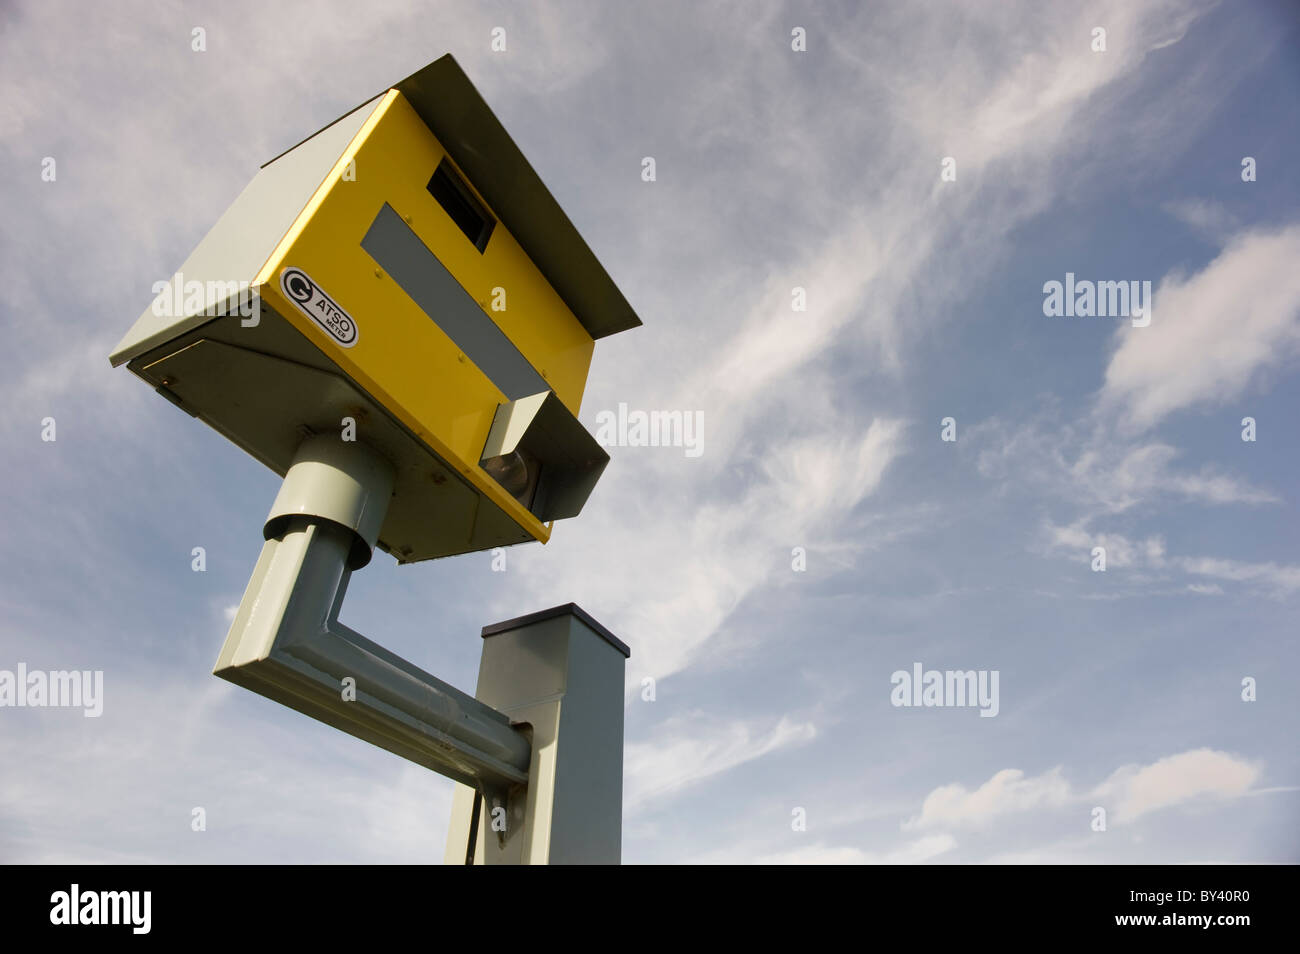 A Gatso speed camera in Hove, East Sussex. Stock Photo